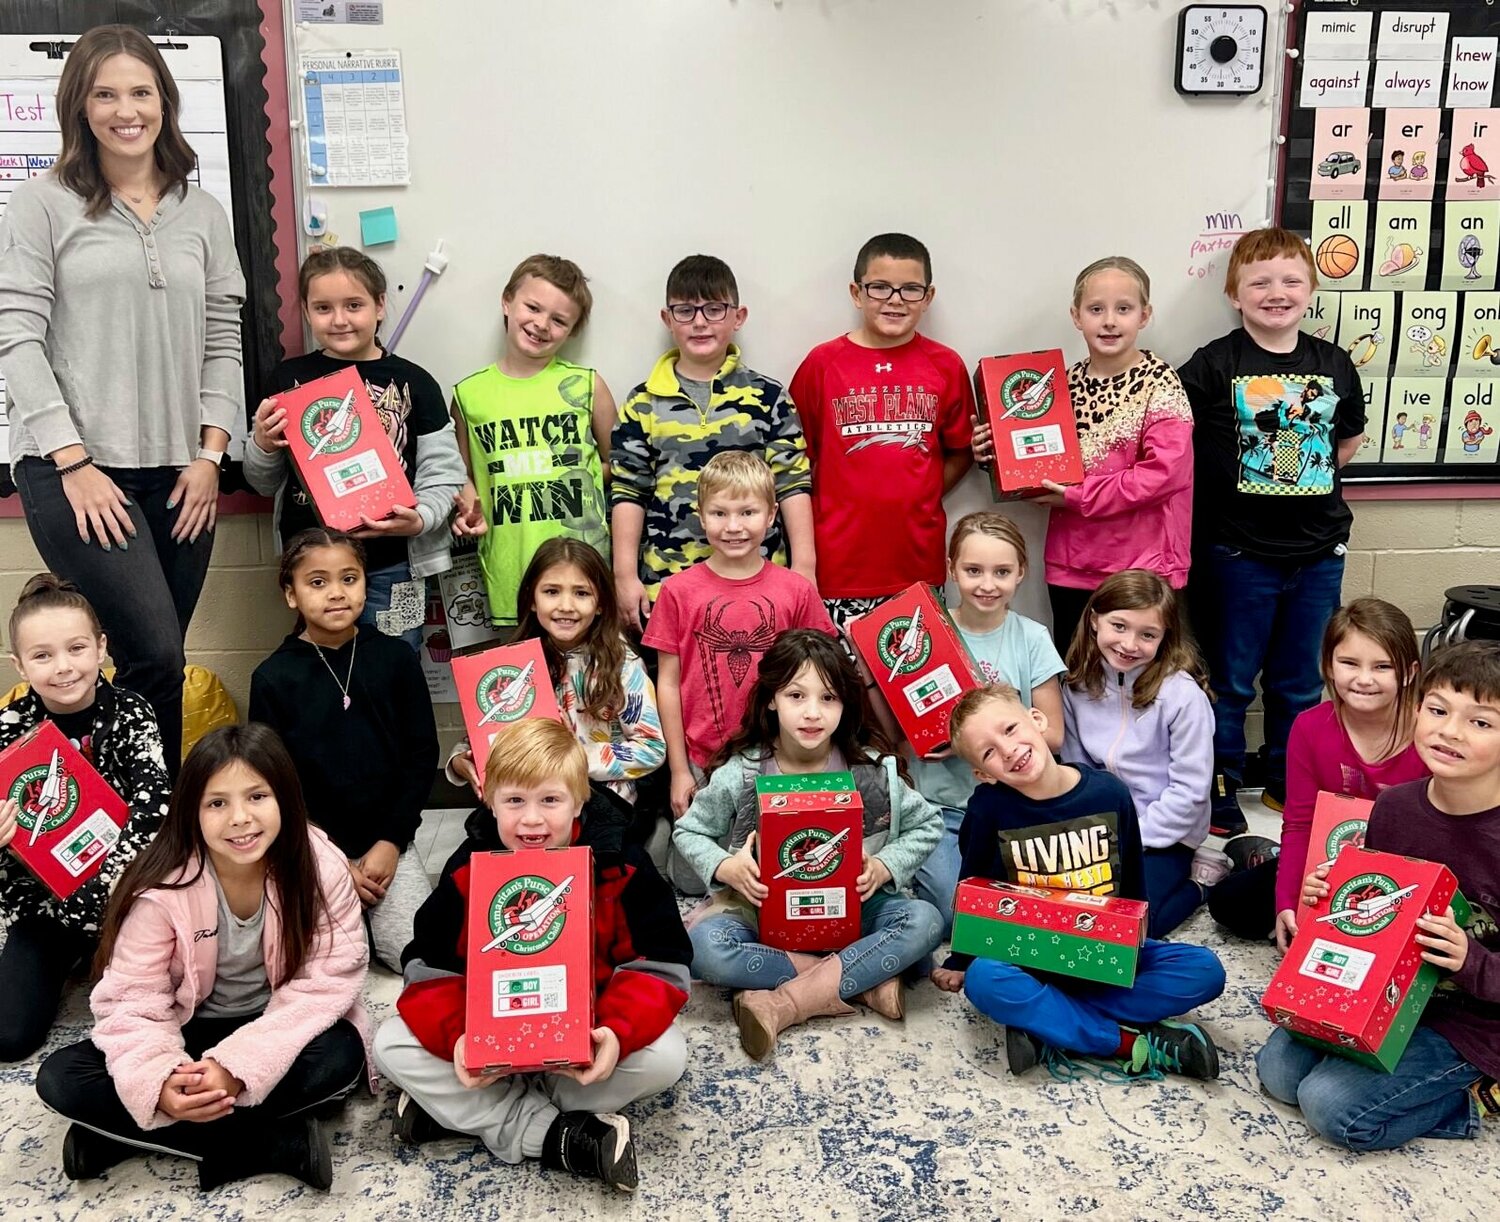 Heidi Schneider's second graders at West Plains Elementary recently teamed up with First Baptist Church to pack 10 boxes filled with gifts for Operation Christmas Child. The boxes will be sent to children around the world. Operation Christmas Child is a project of Samaritan’s Purse, which has the stated mission to show God’s love to children in need and share the gospel of Jesus Christ. Learn more at samaritanspurse.org/occ.